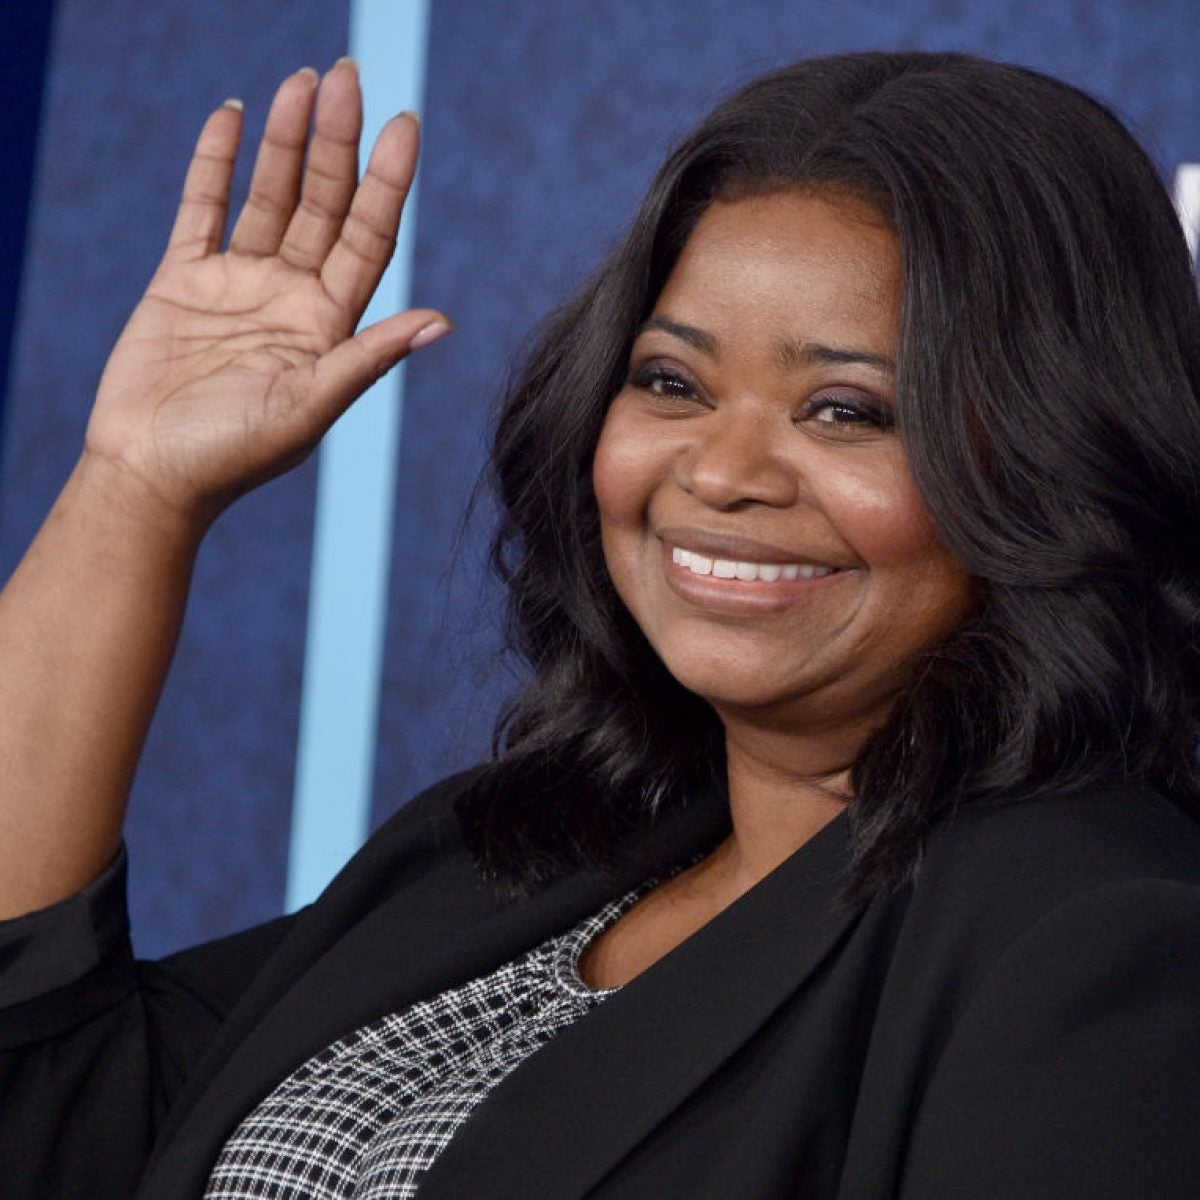 Exclusive: Octavia Spencer On How She's Caring For Her Mental Health During Social Distancing